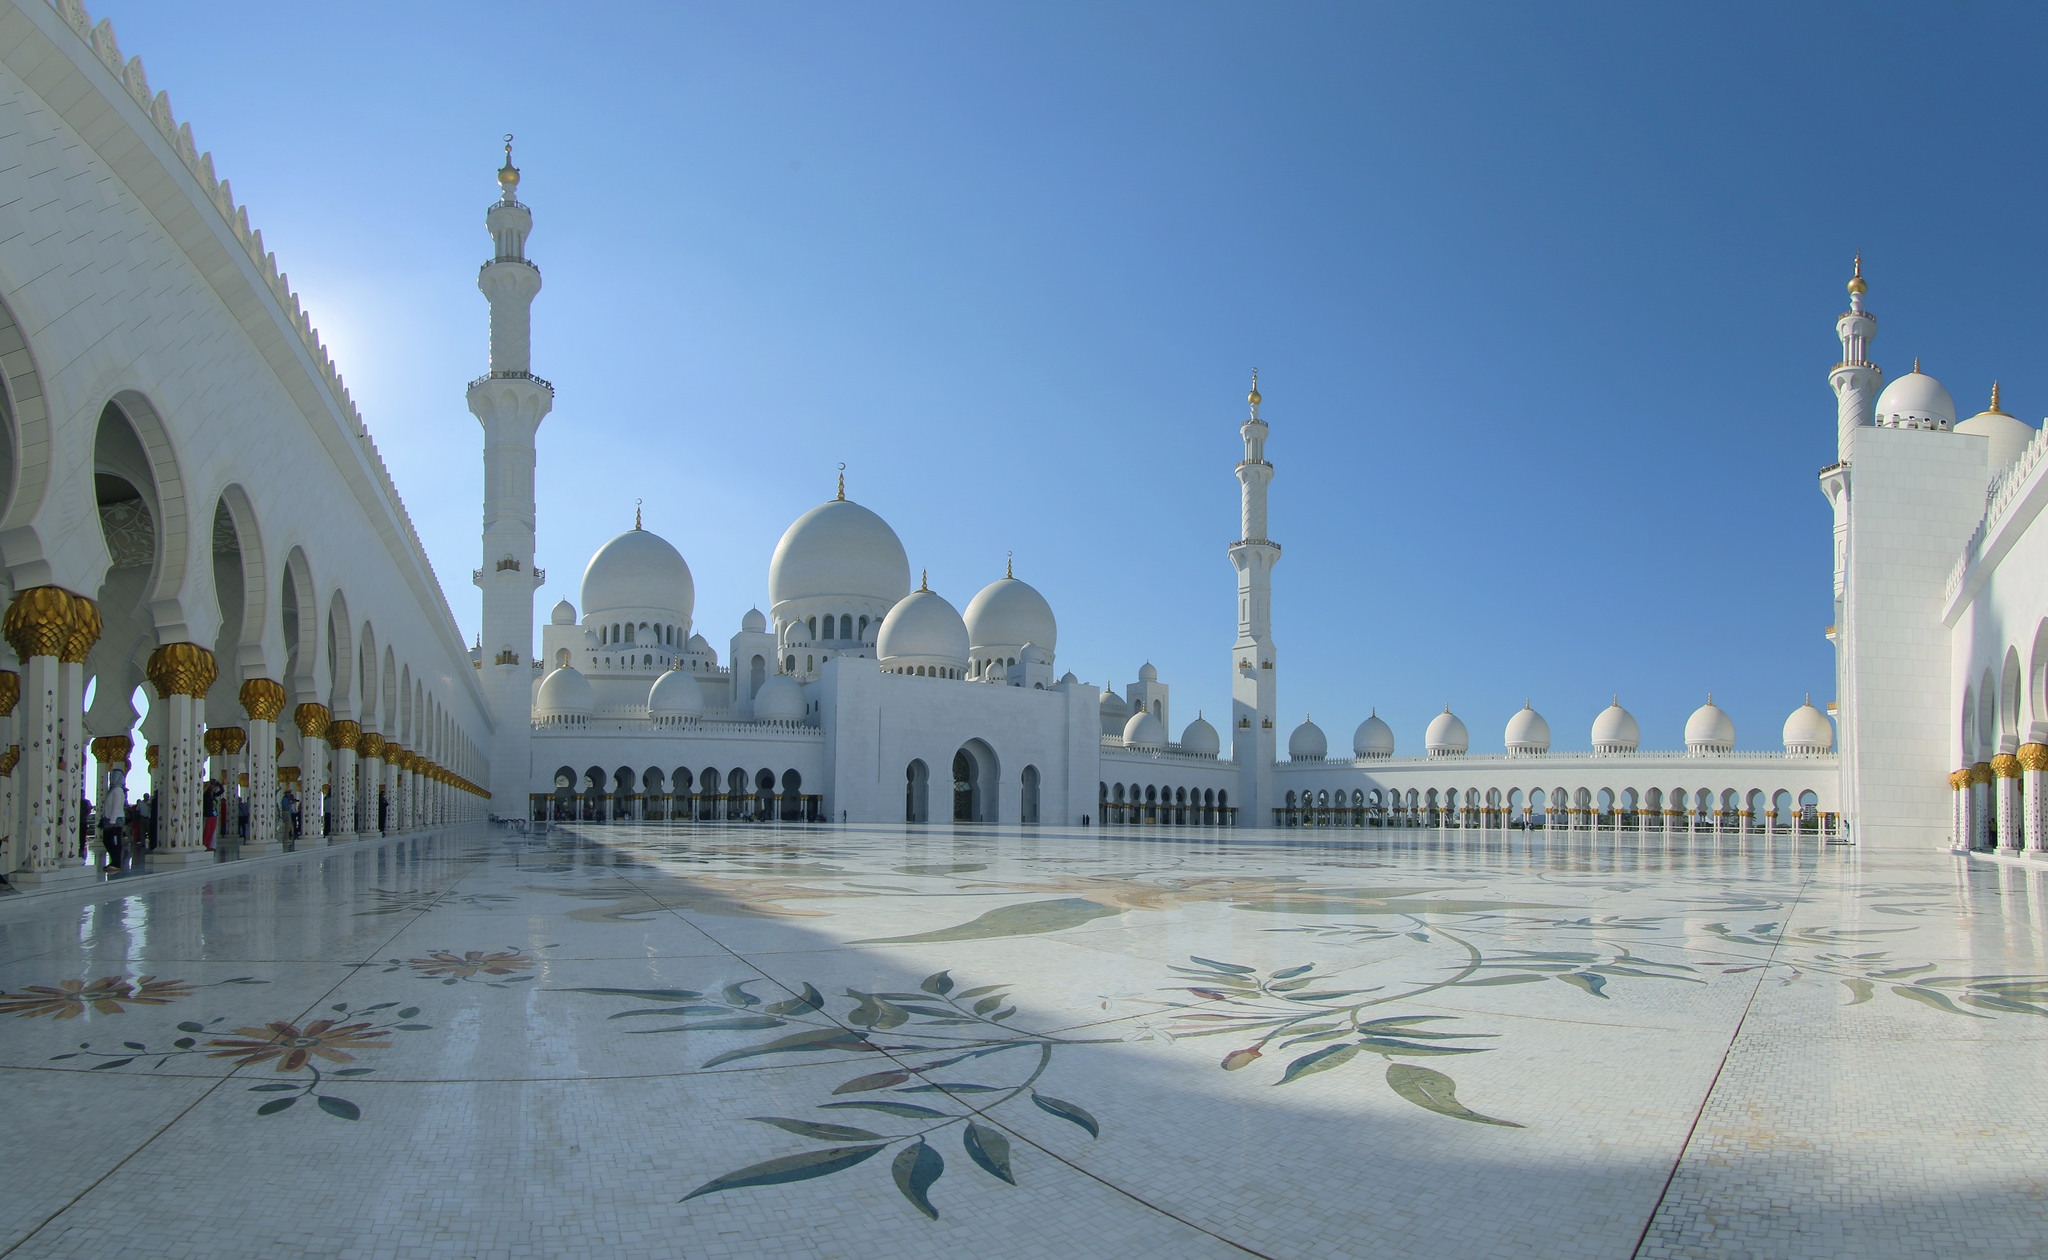 Wallpapers sheikh zayed mosque abu dhabi united arab emirates on the desktop